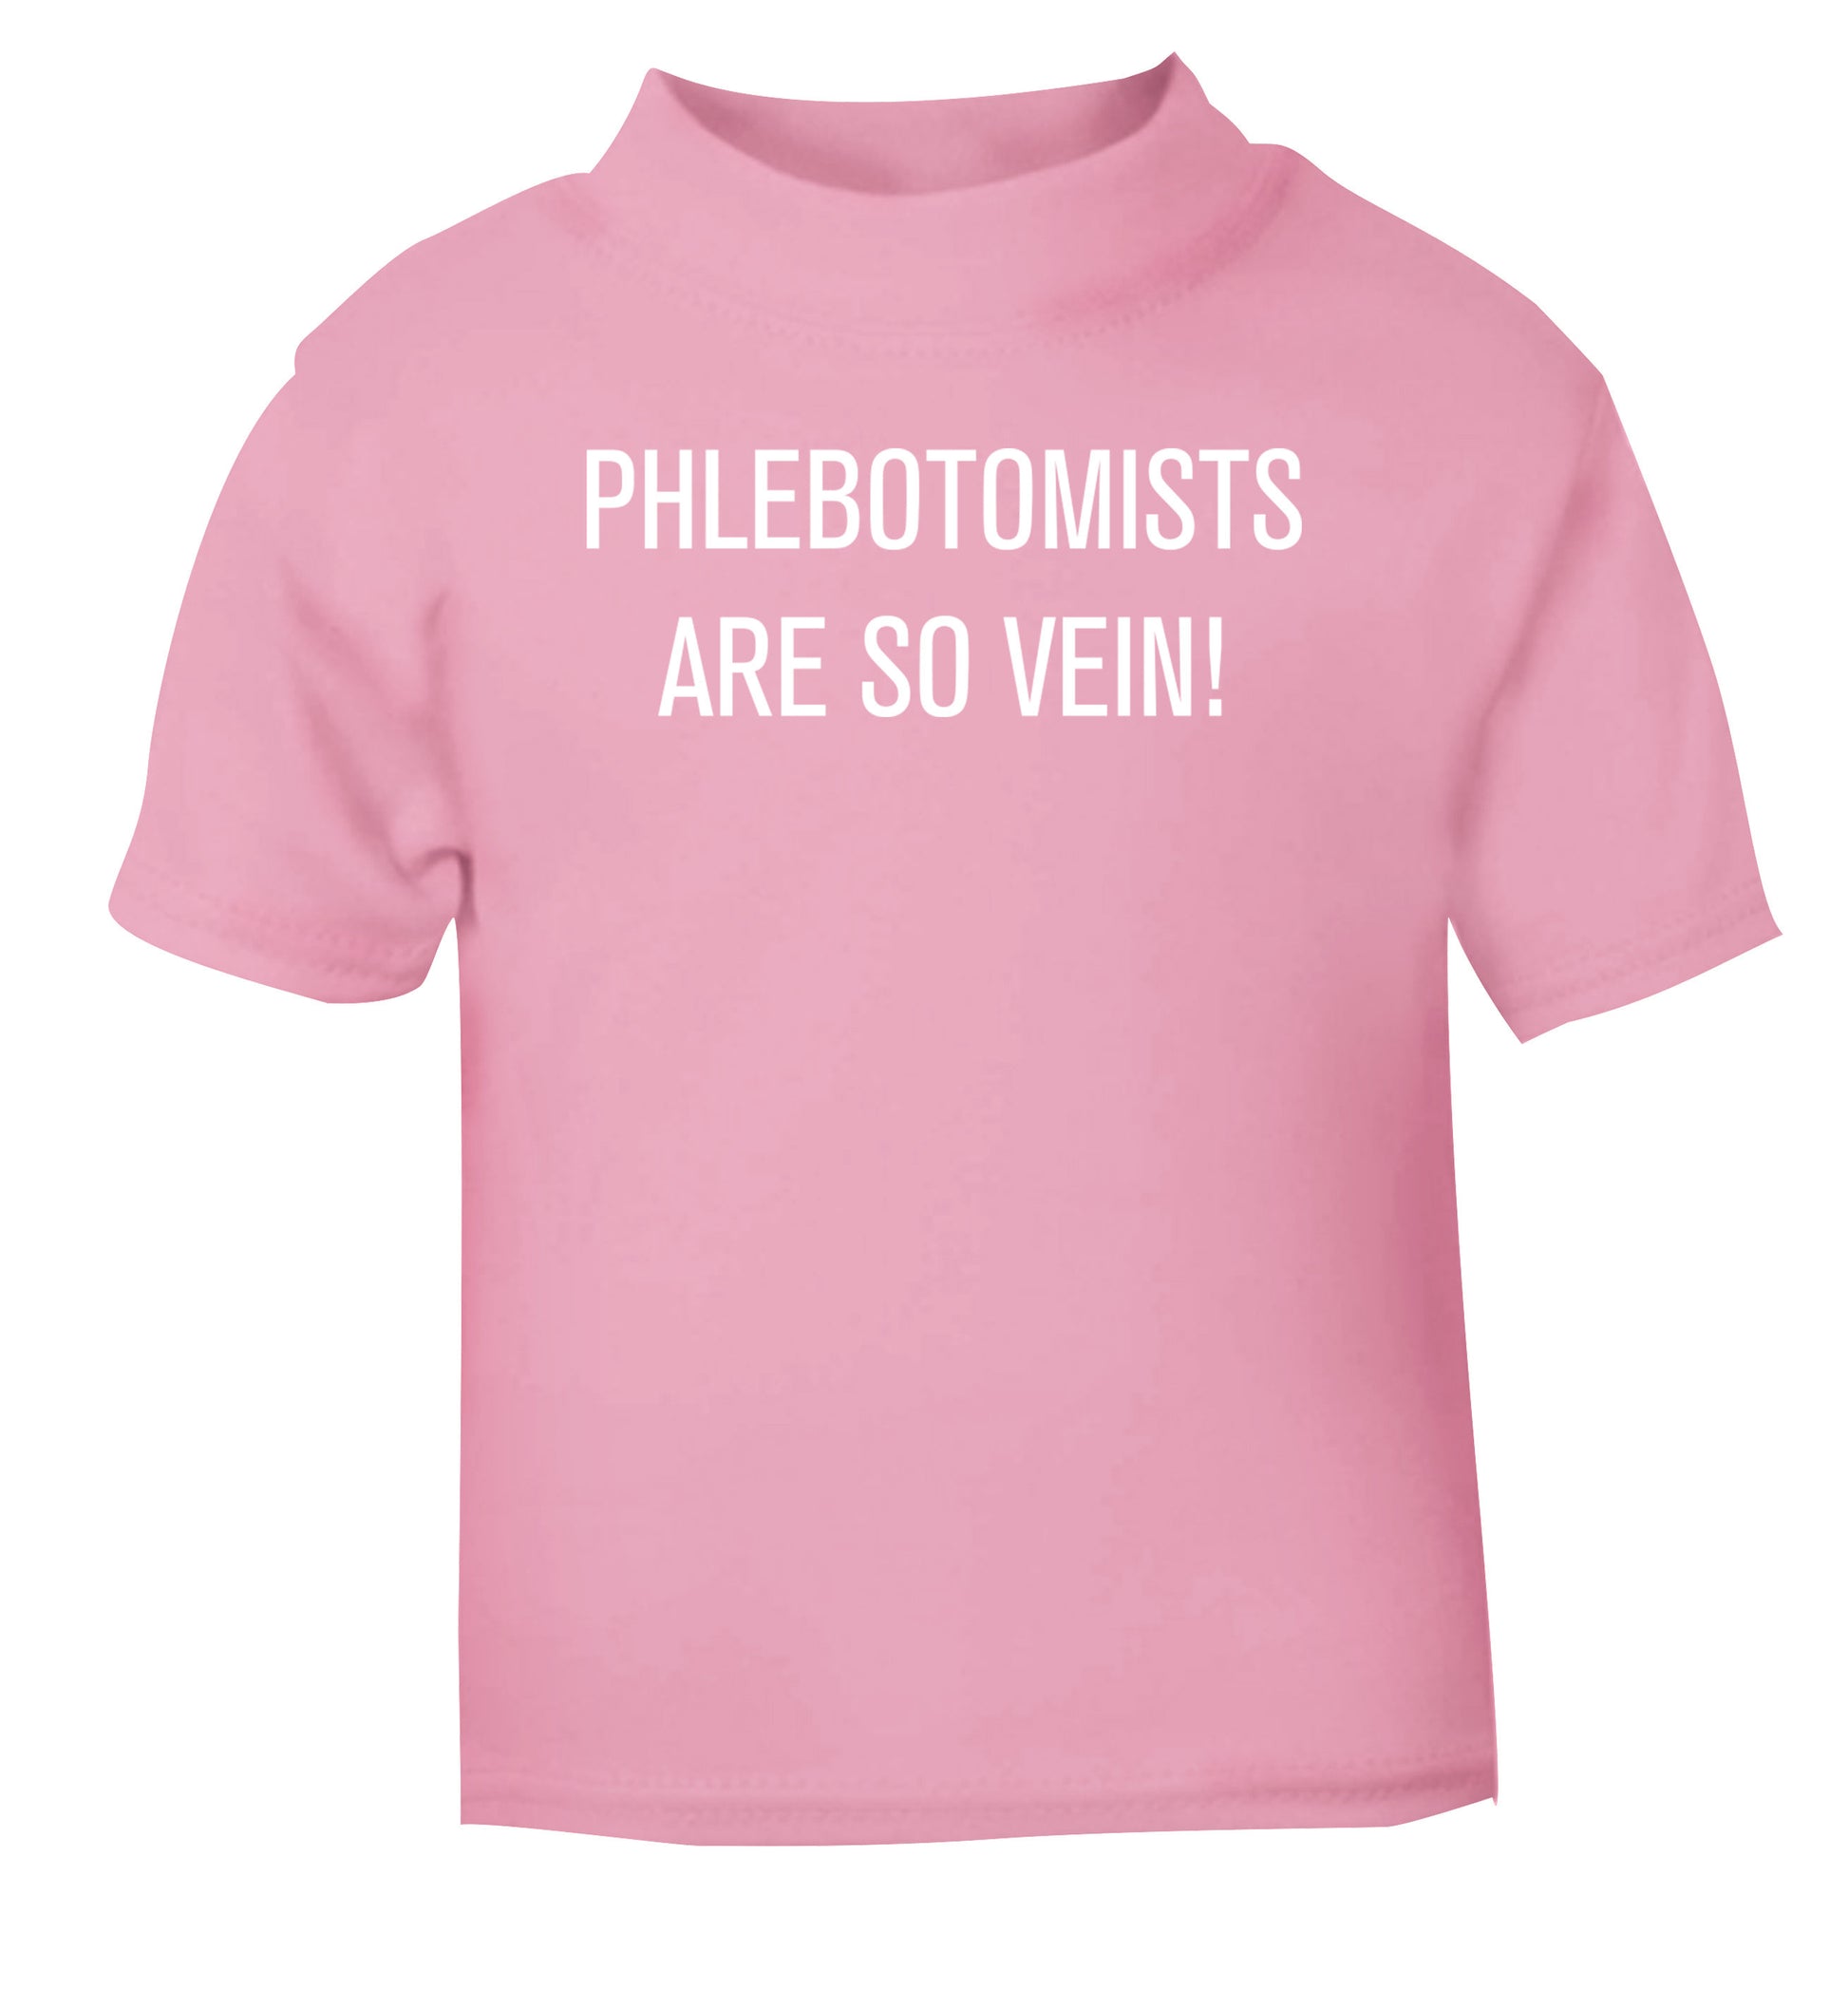 Phlebotomists are so vein! light pink Baby Toddler Tshirt 2 Years